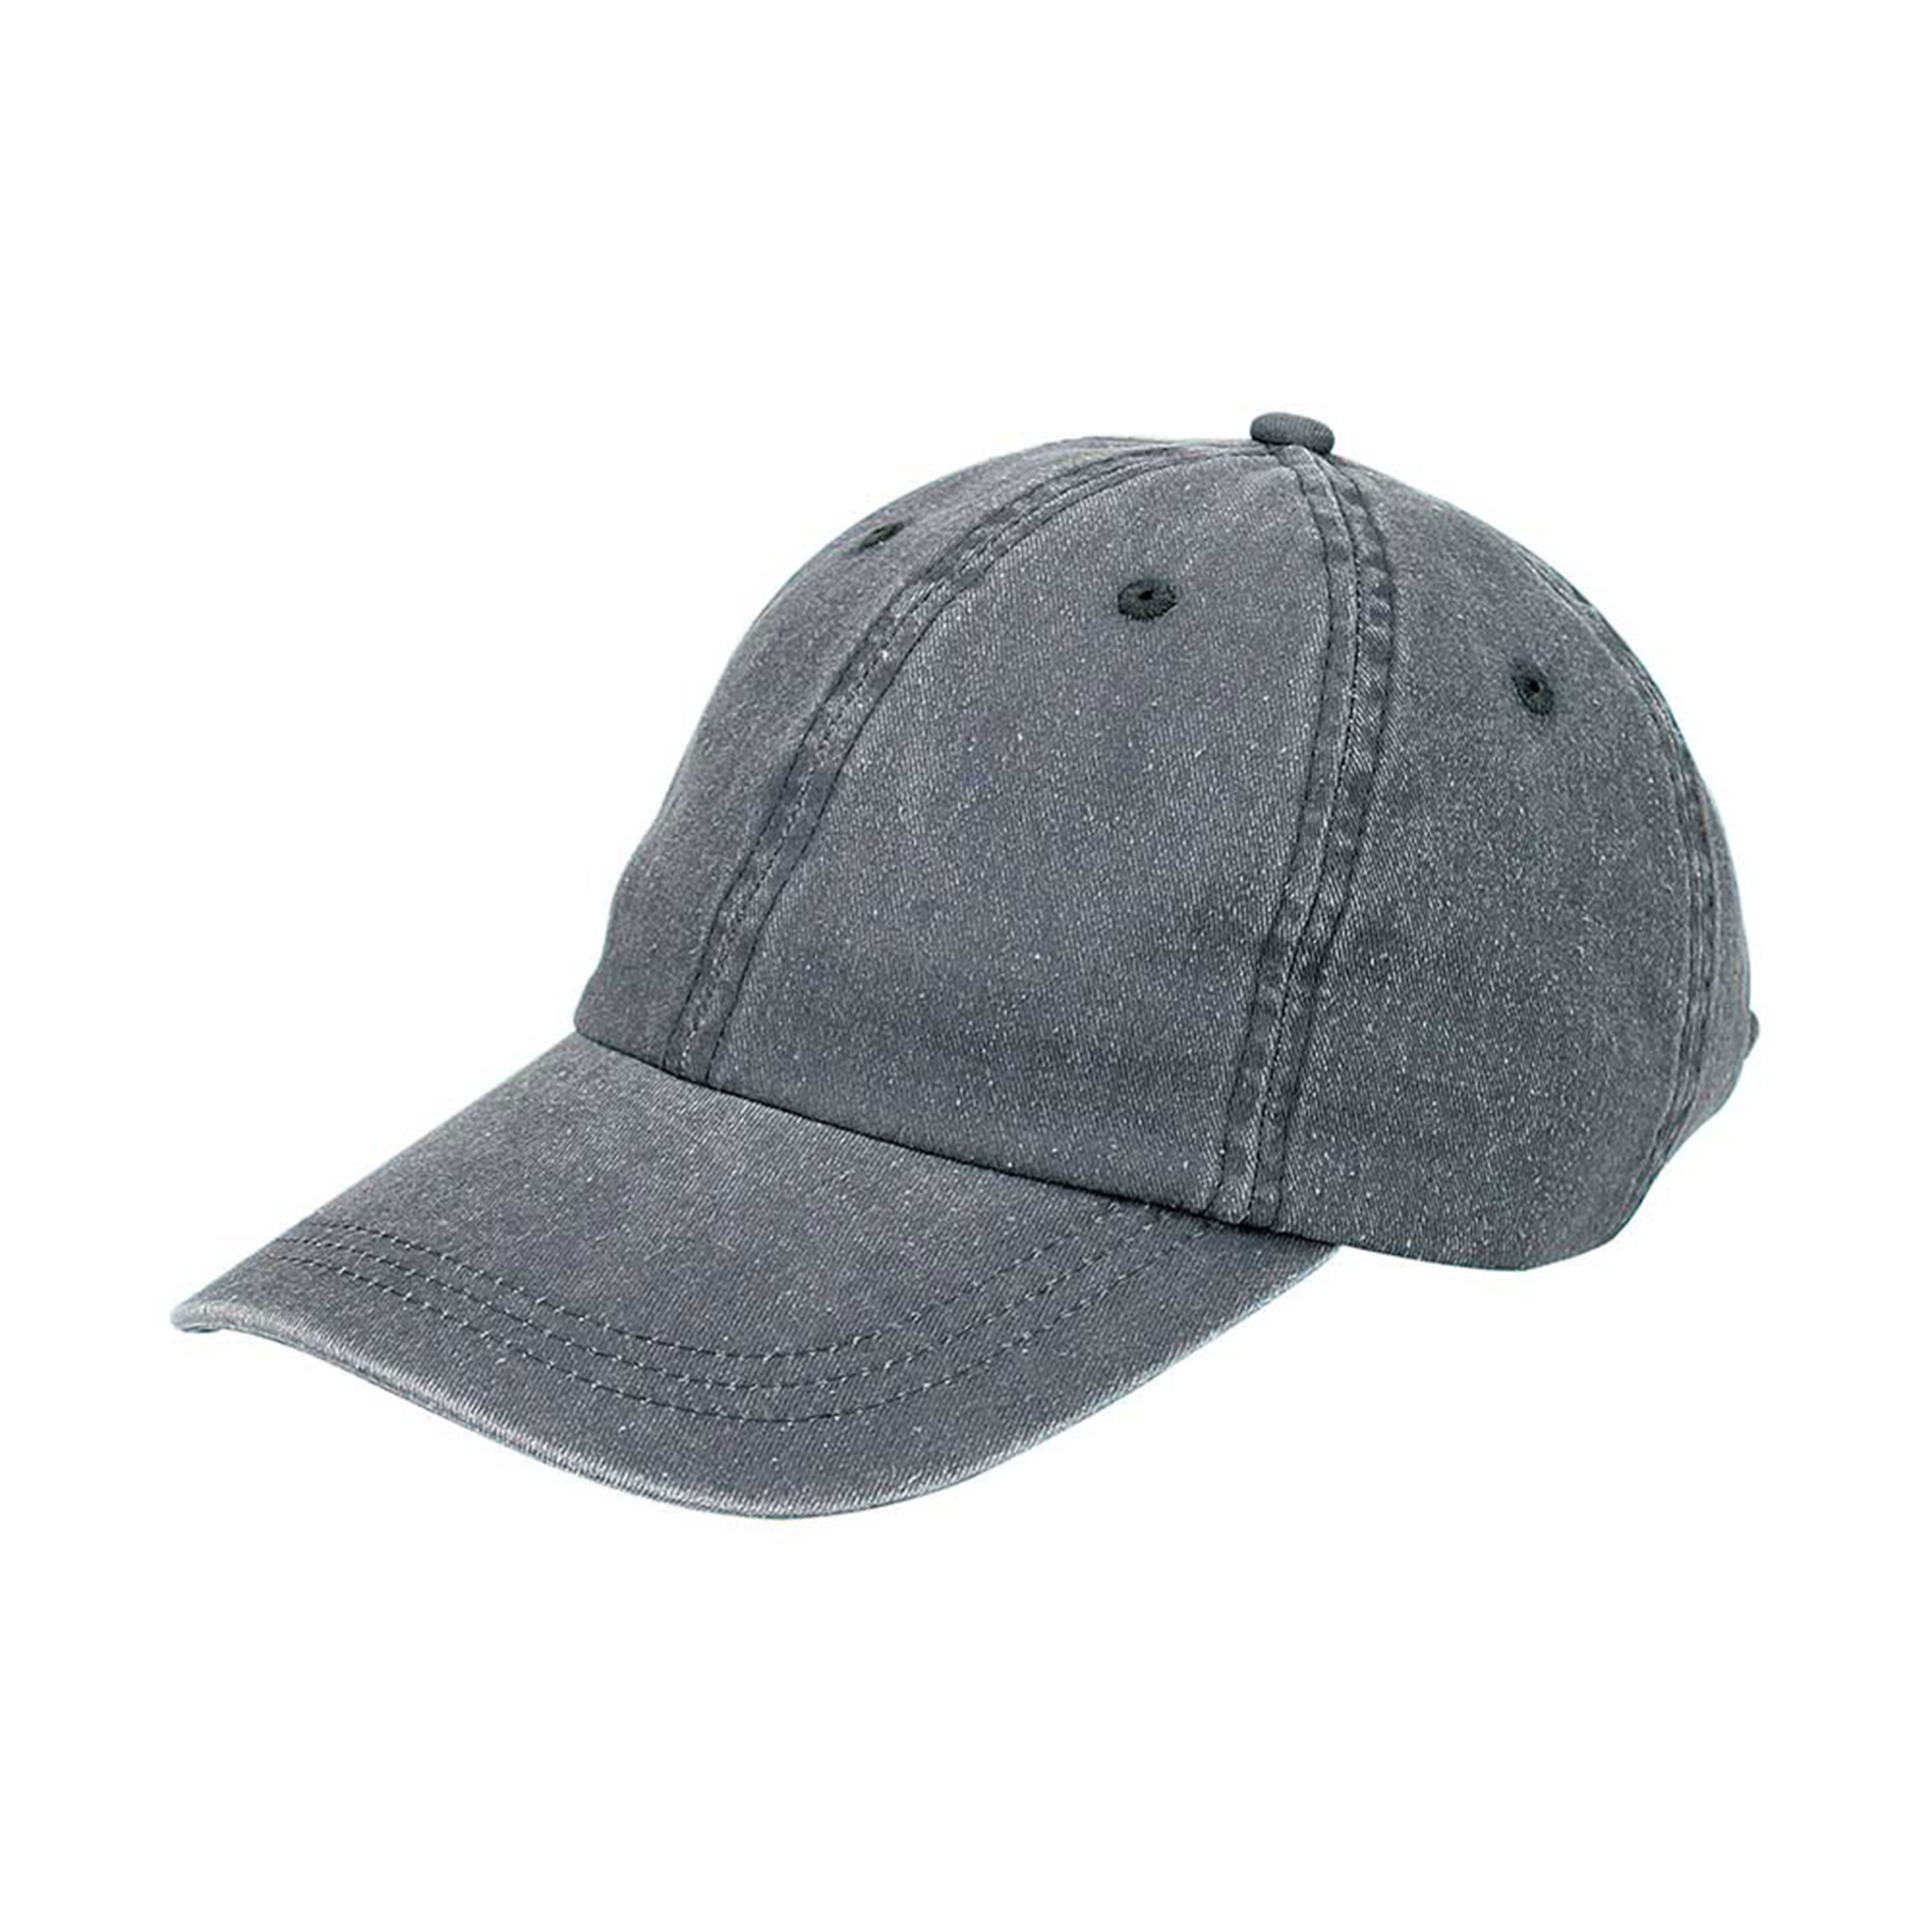 Mega Cap® 7601 Washed Pigment Dyed Cotton Twill Cap